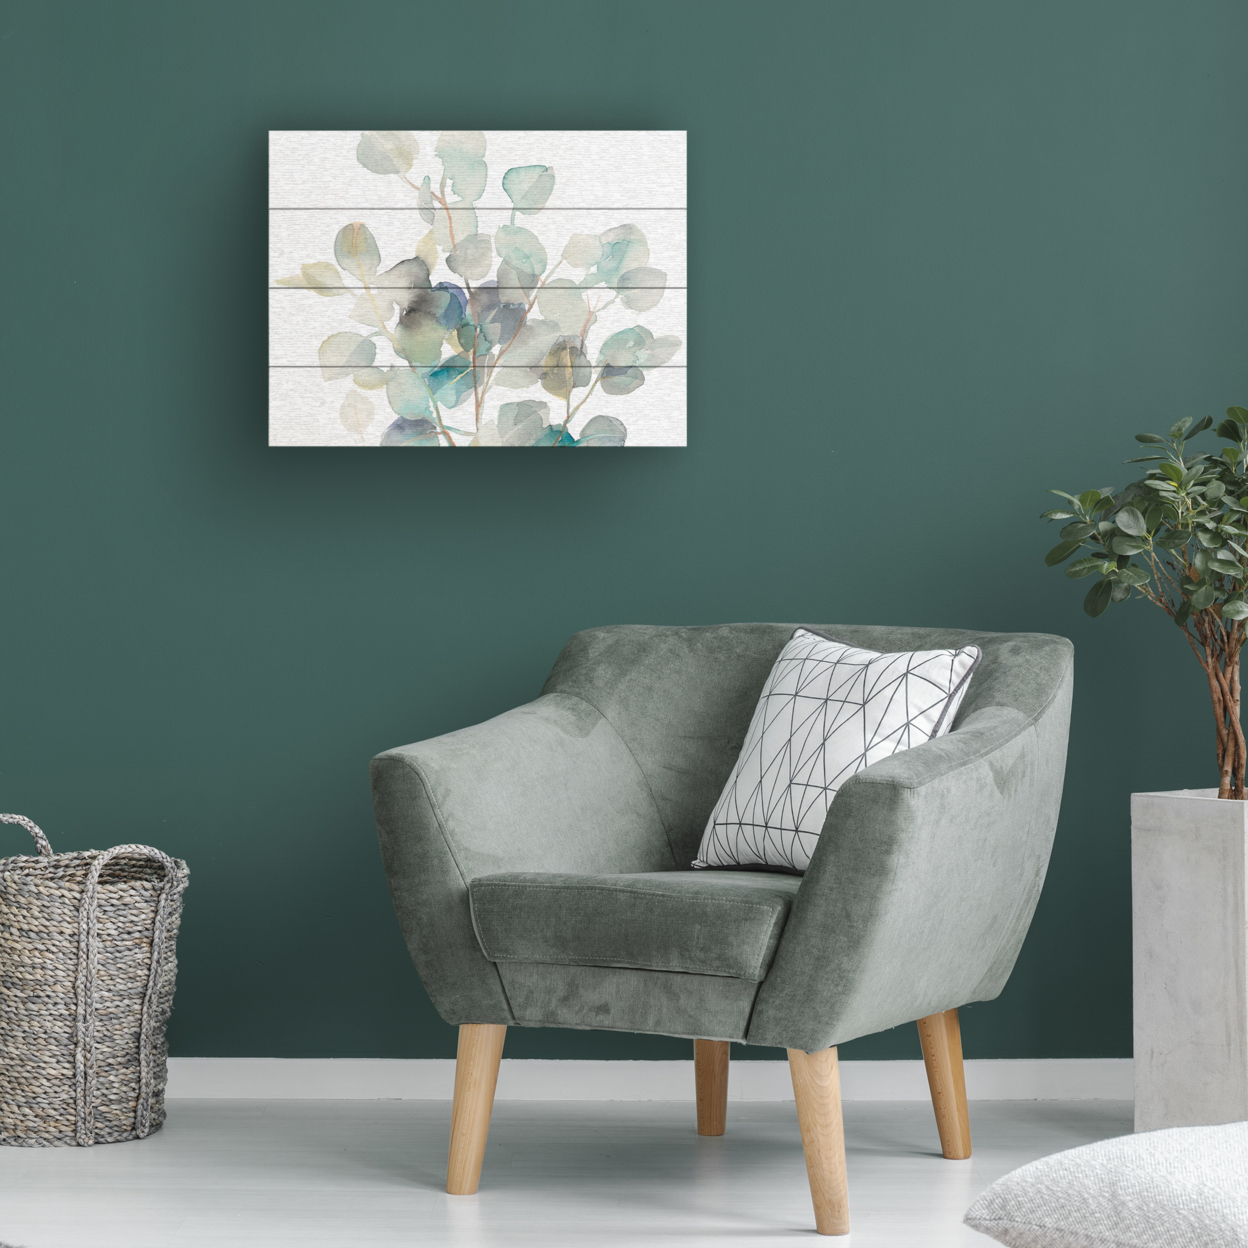 Wall Art 12 X 16 Inches Titled Eucalyptus III White Ready To Hang Printed On Wooden Planks